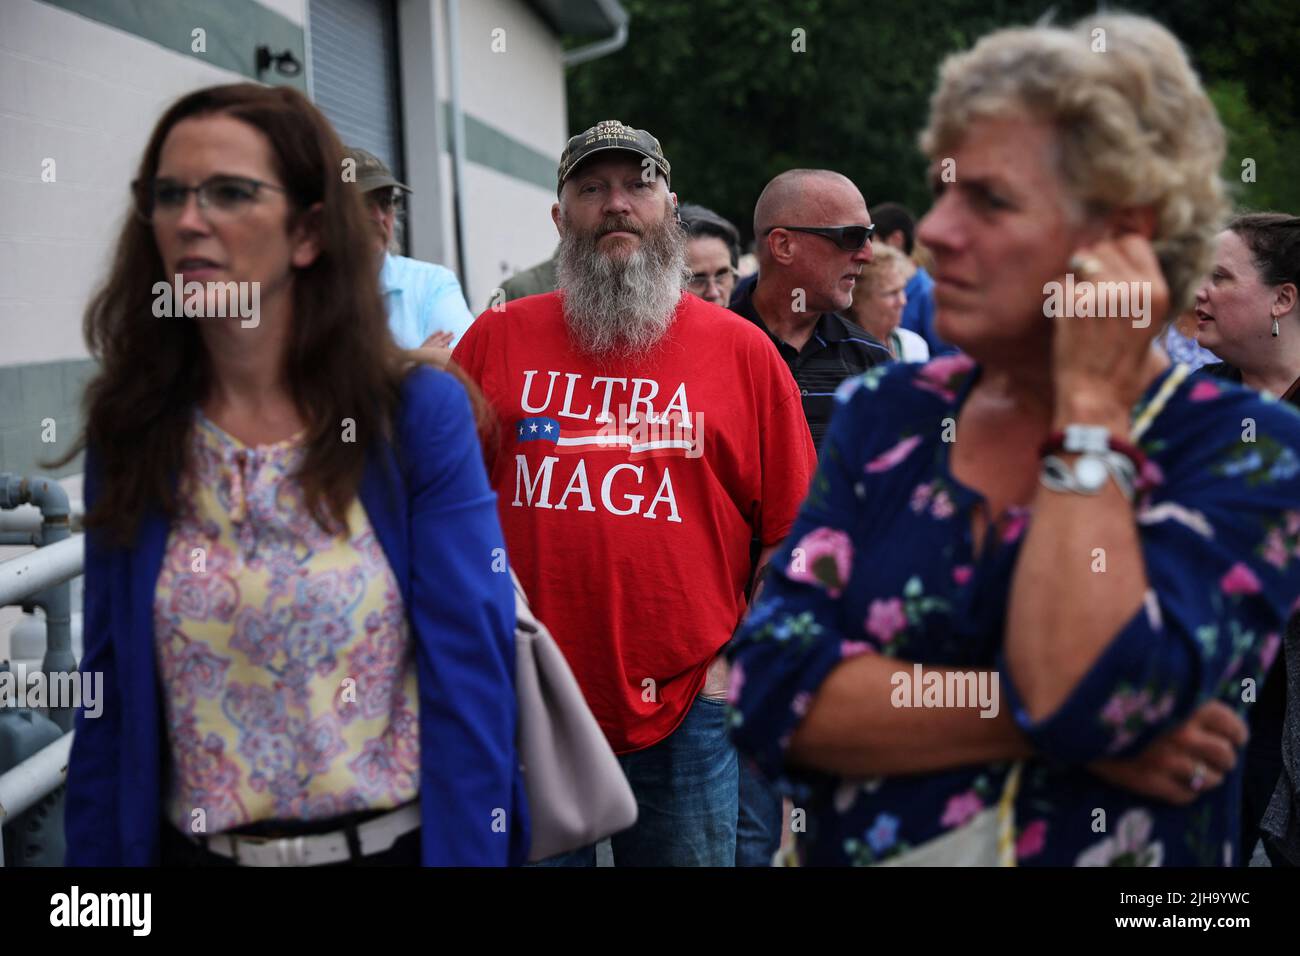 Patrick Wallen waits with others in line for the screening of the documentary 'The Return of the American Patriot: The Rise of Pennsylvania' at Christ Community Church in Camp Hill, Pennsylvania, U.S., July 16, 2022. REUTERS/Shannon Stapleton Stock Photo